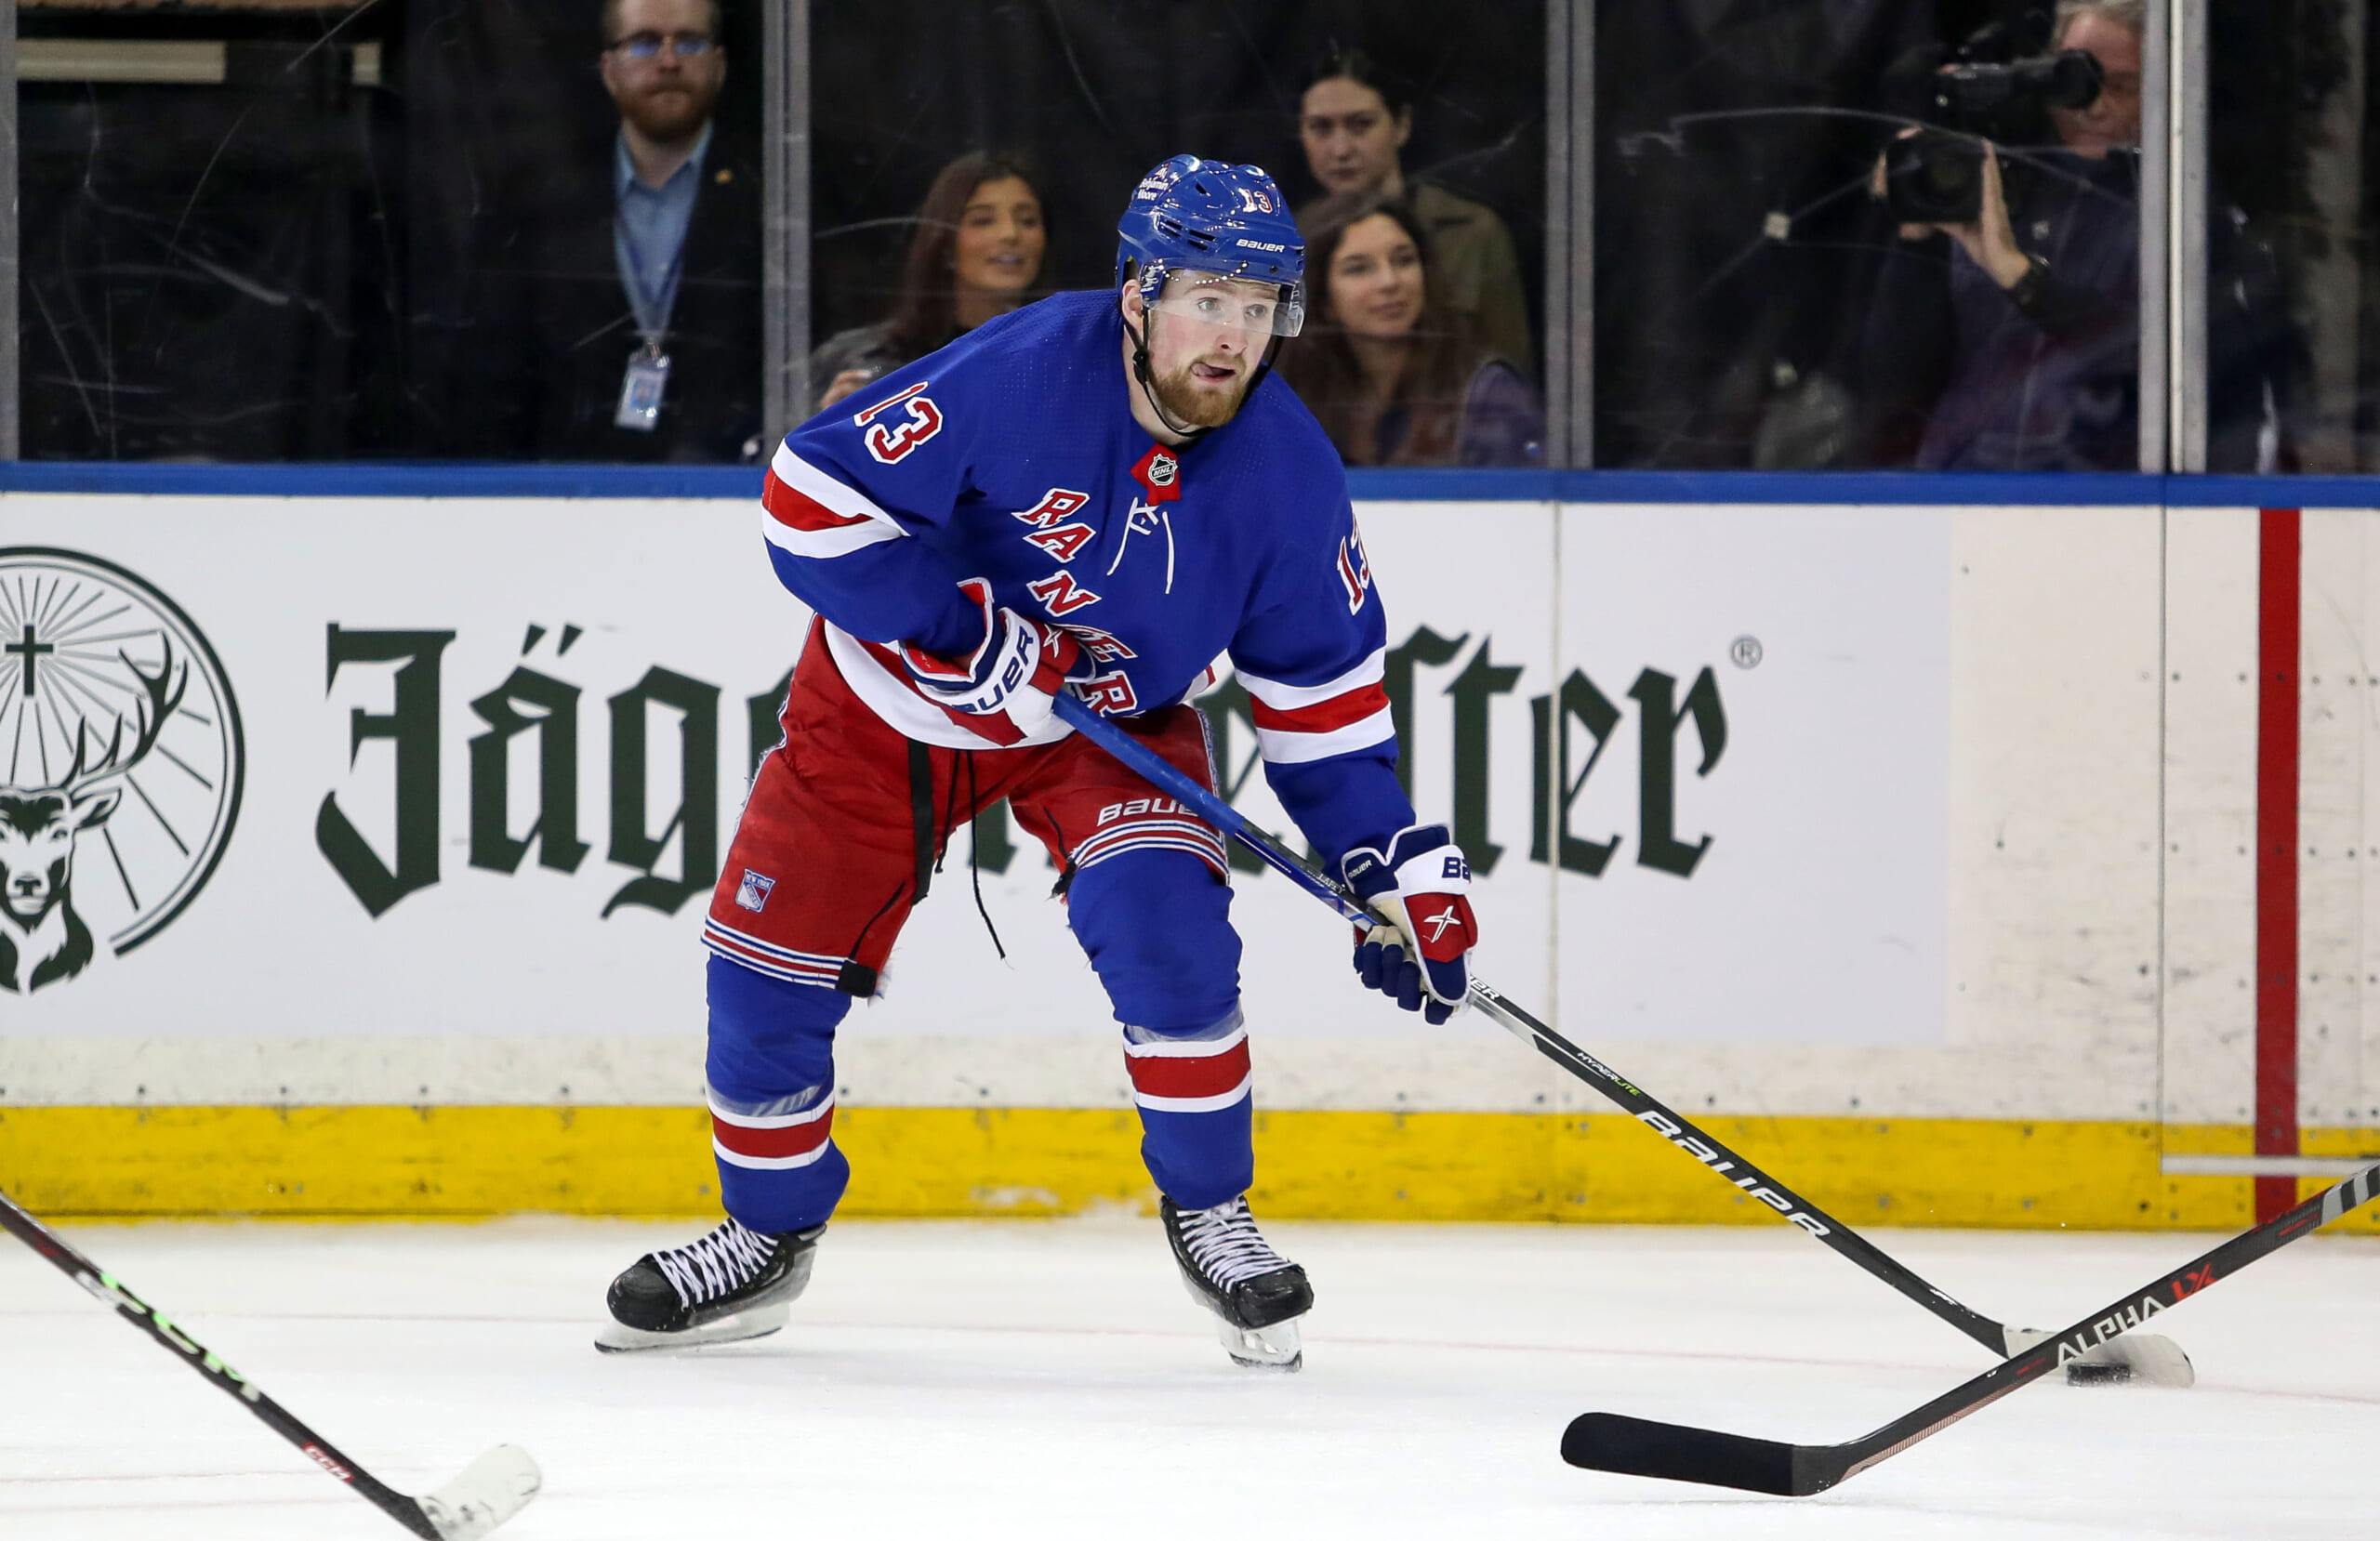 Final takeaways of the 2023 preseason for the NY Rangers